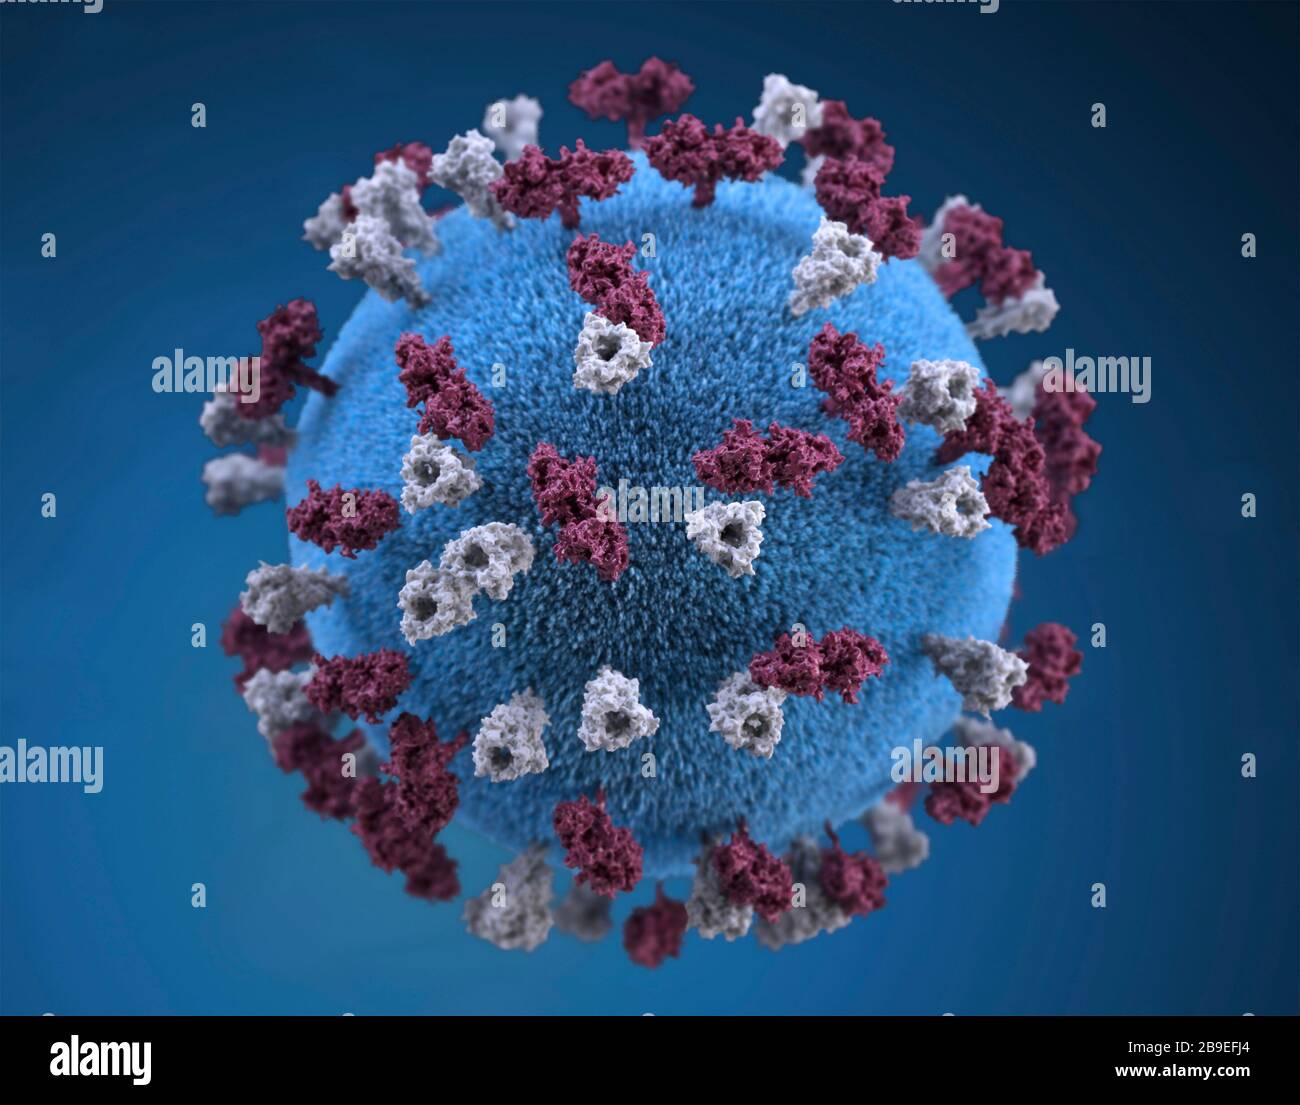 3D illustration of spherical-shaped, measles virus particle. Stock Photo